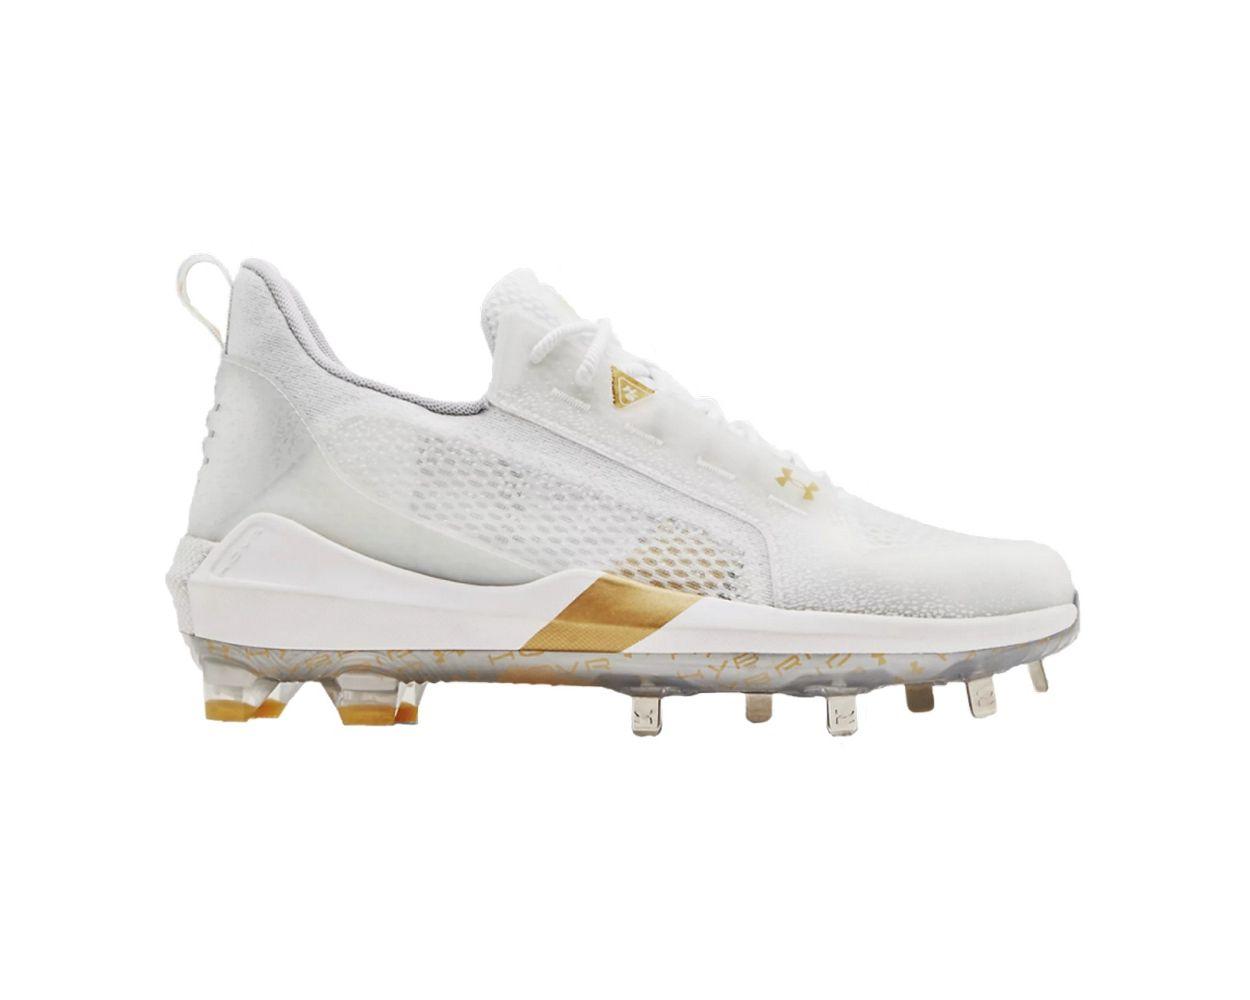 White used Adult Men's 7.0 (W 8.0) Molded Under Armour Bryce Harper Cleat